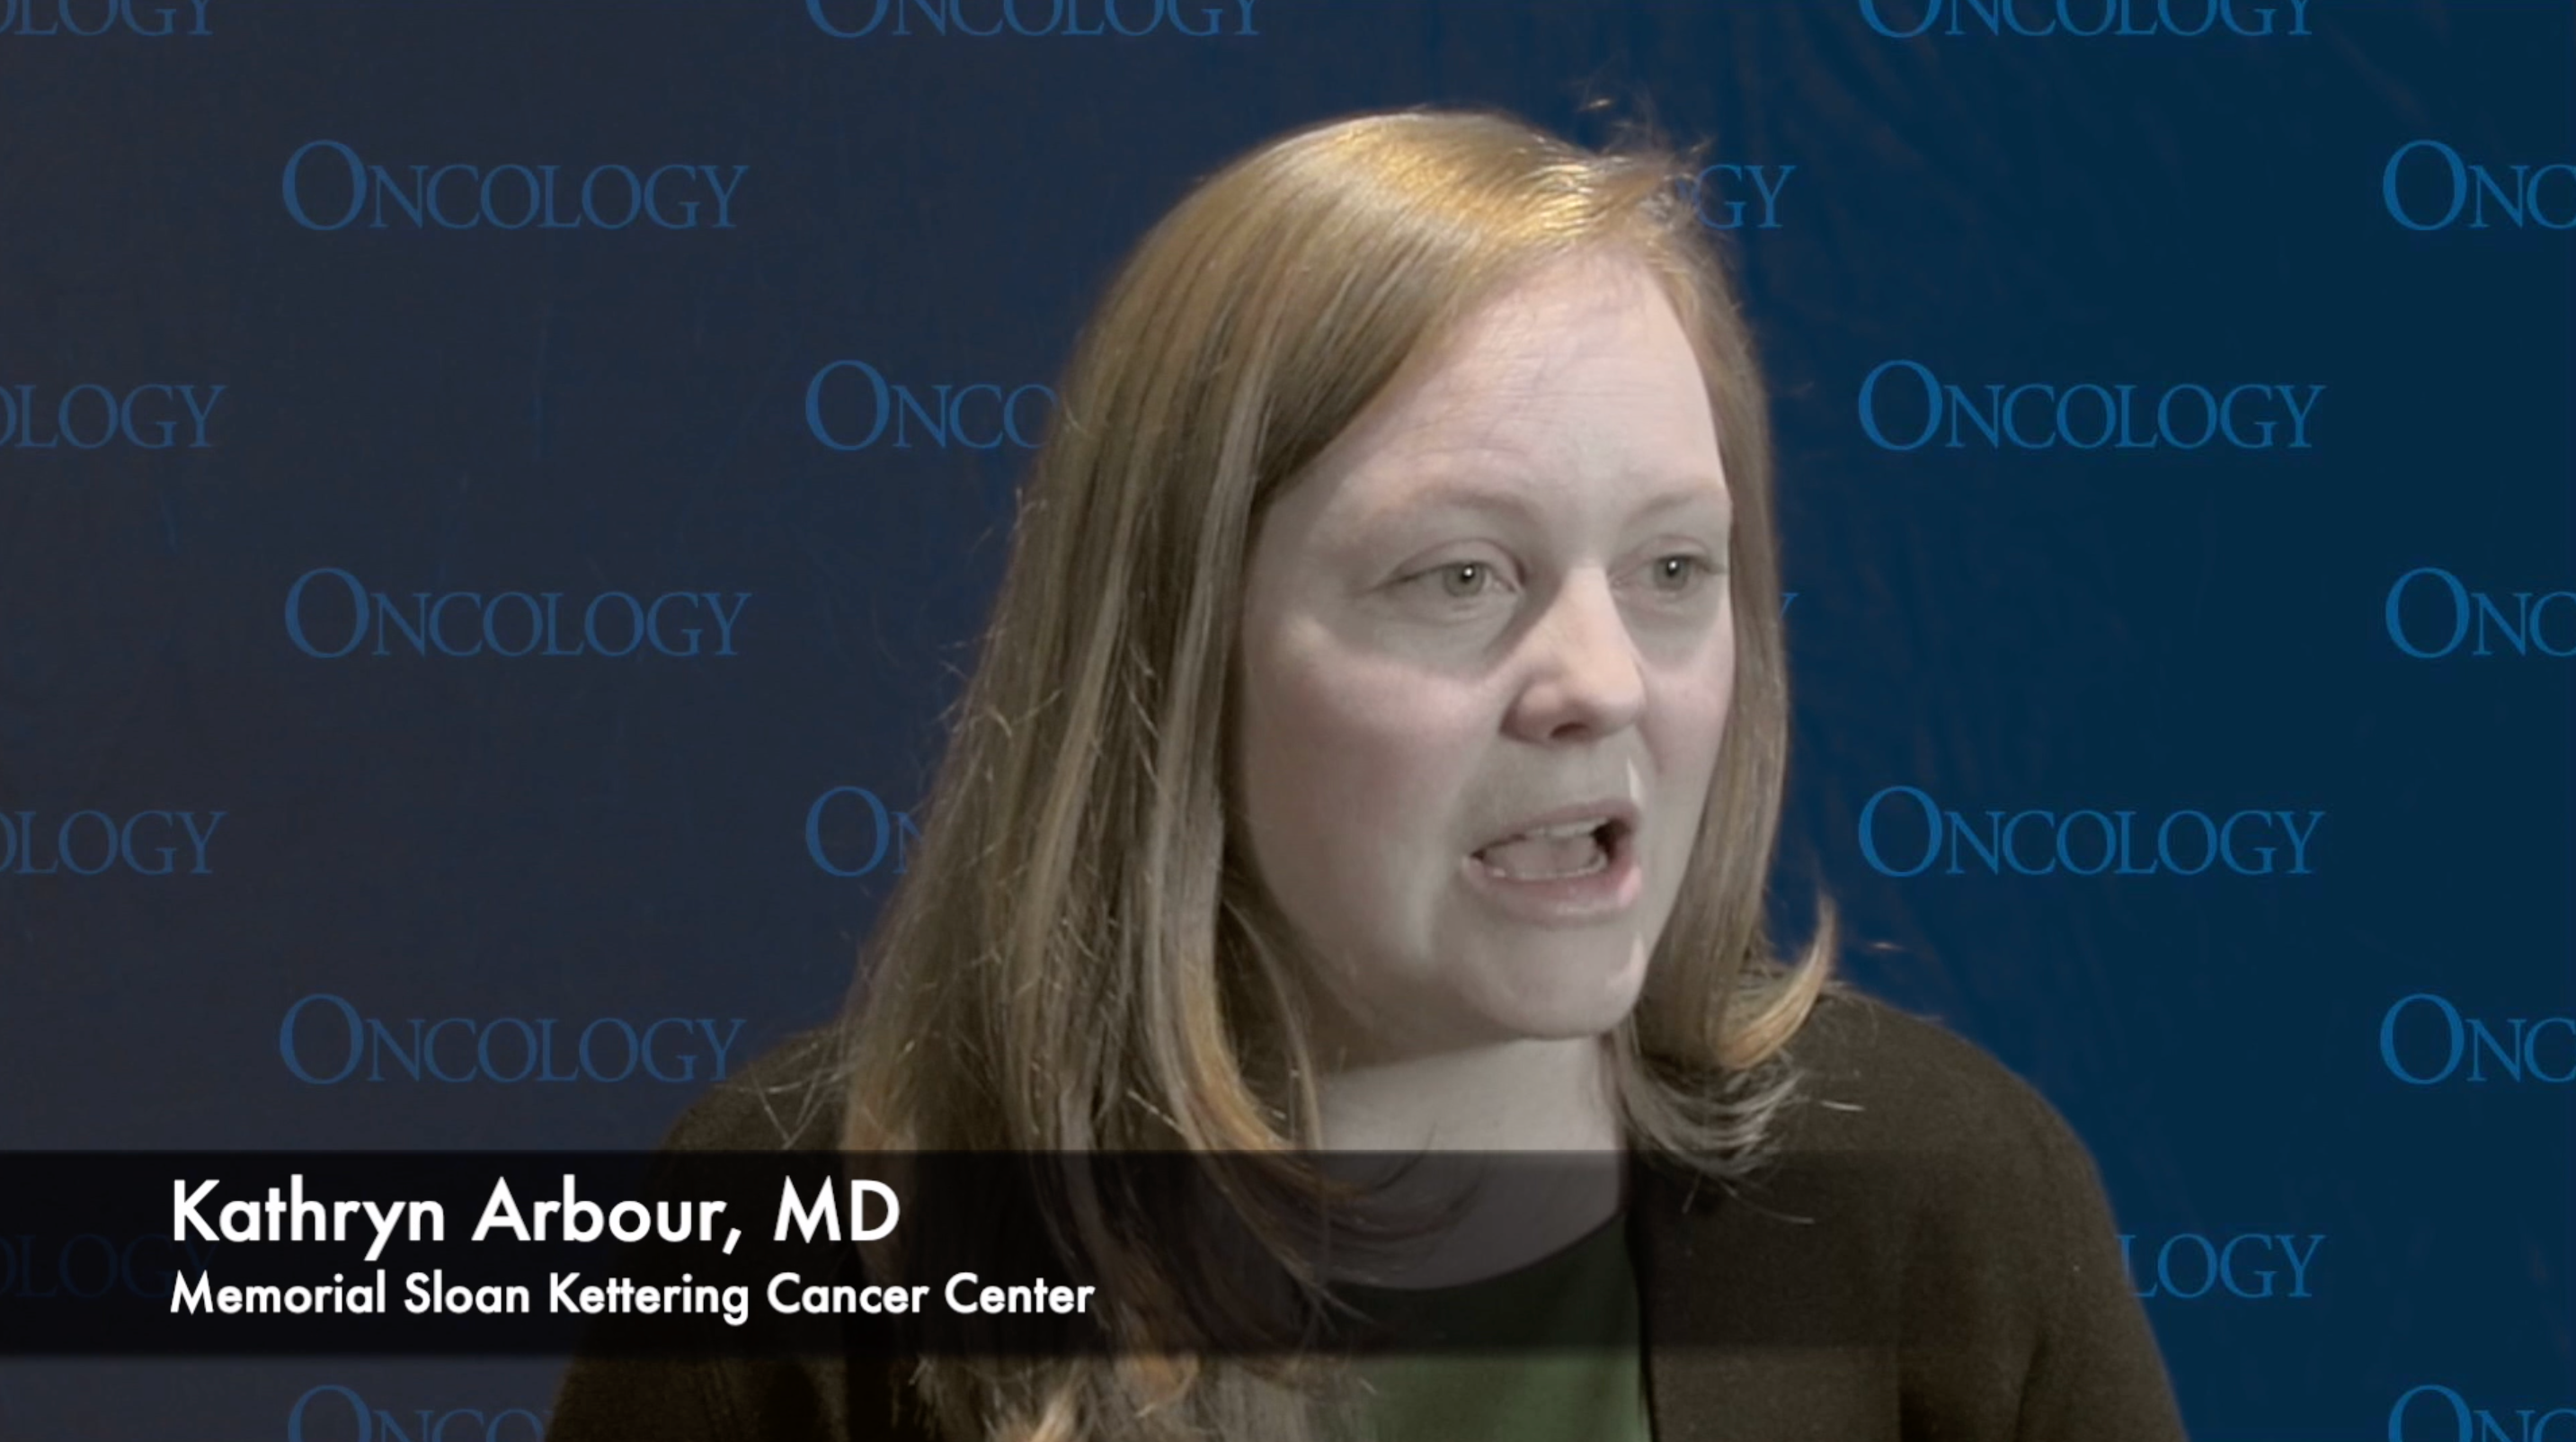 Kathryn Arbour, MD, on the Development of KRAS G12C Inhibitors in Lung Cancer